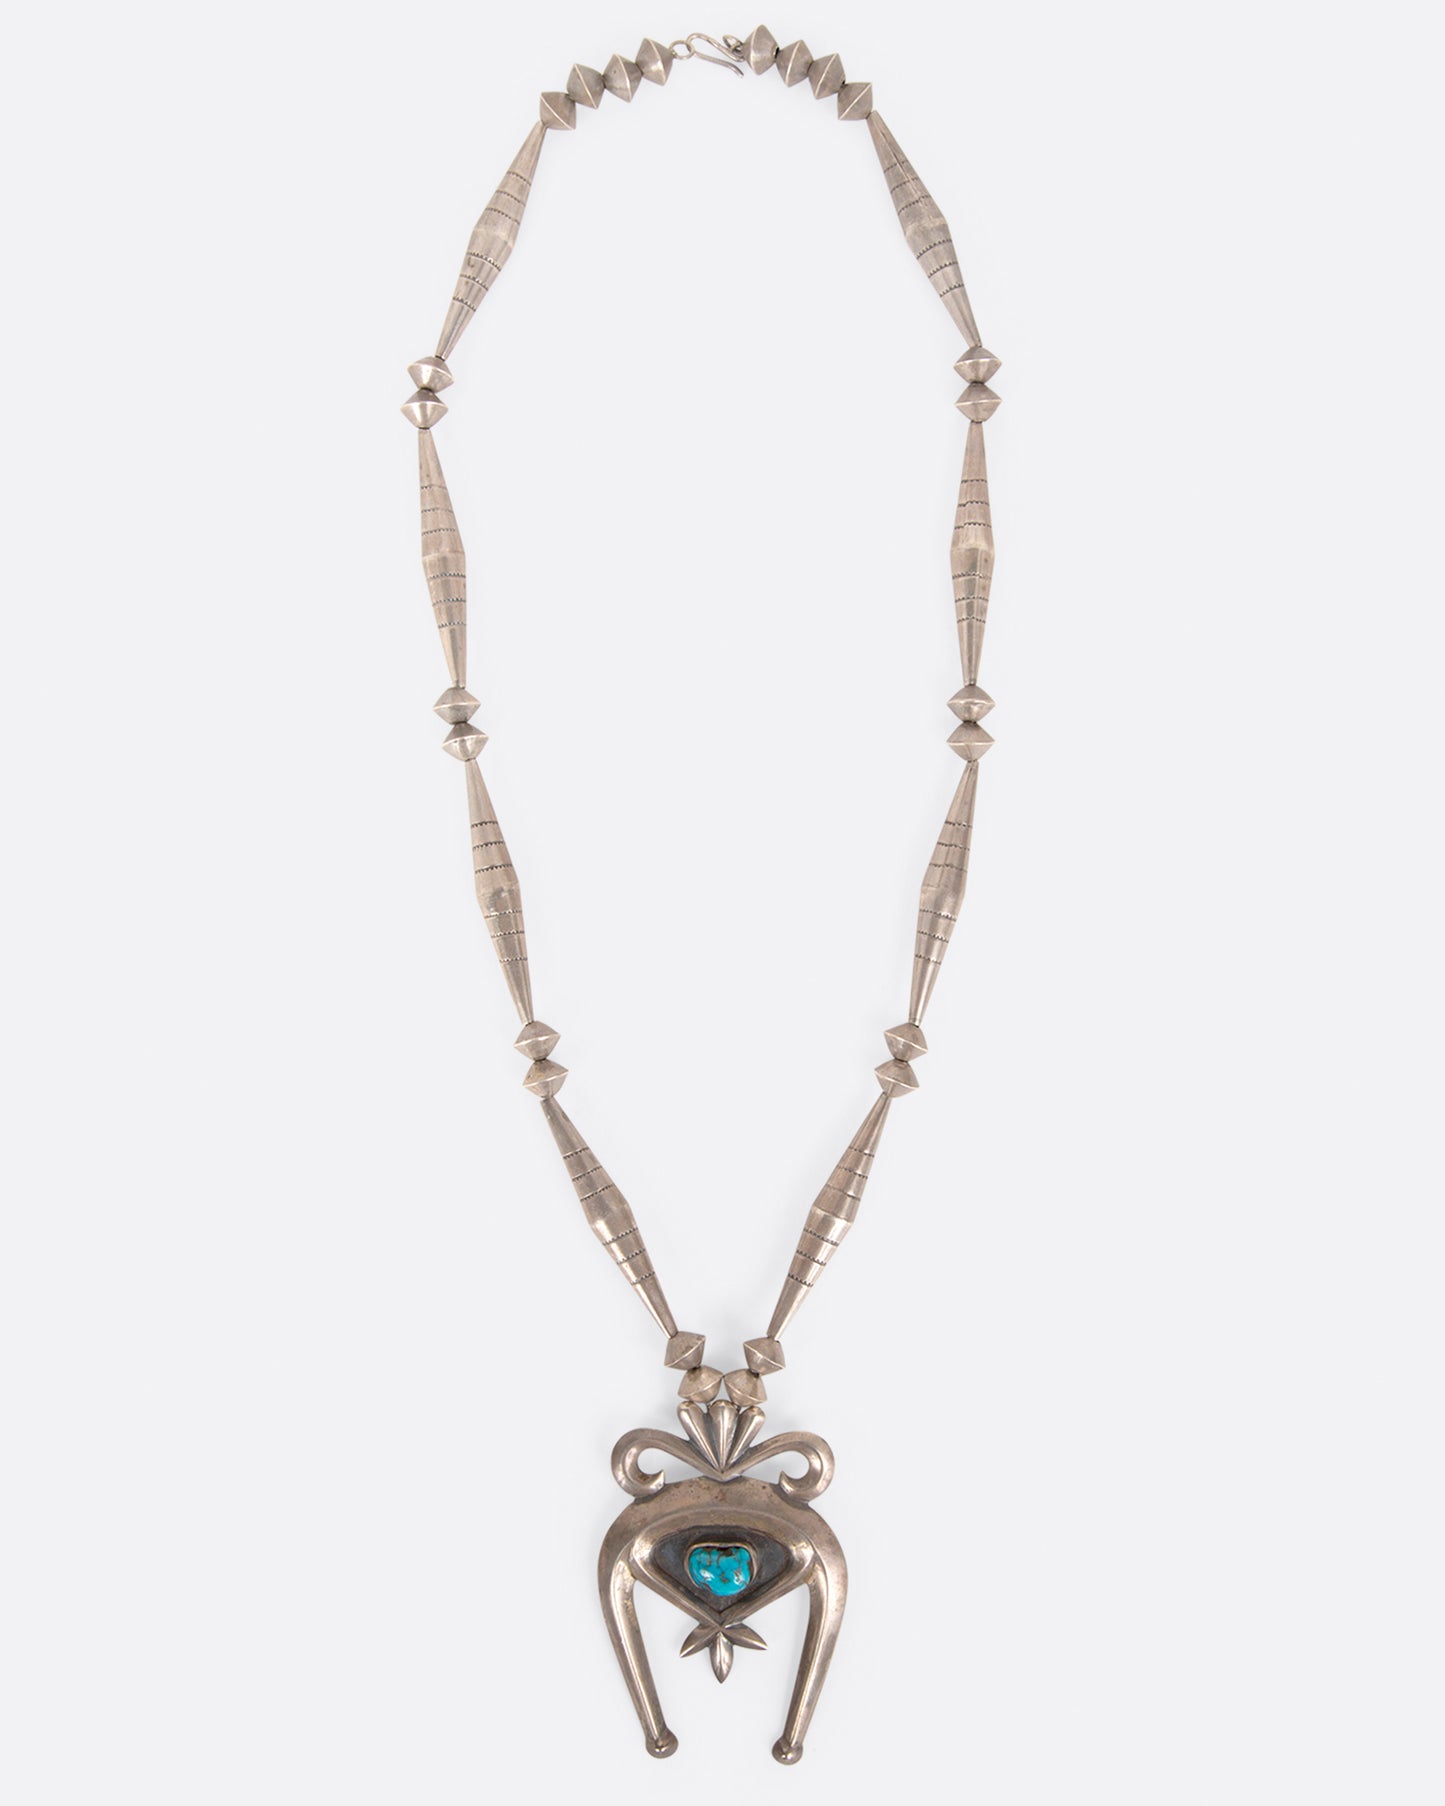 A vintage silver naja necklace with a turquoise stone at the center of the pendant, shown from above.